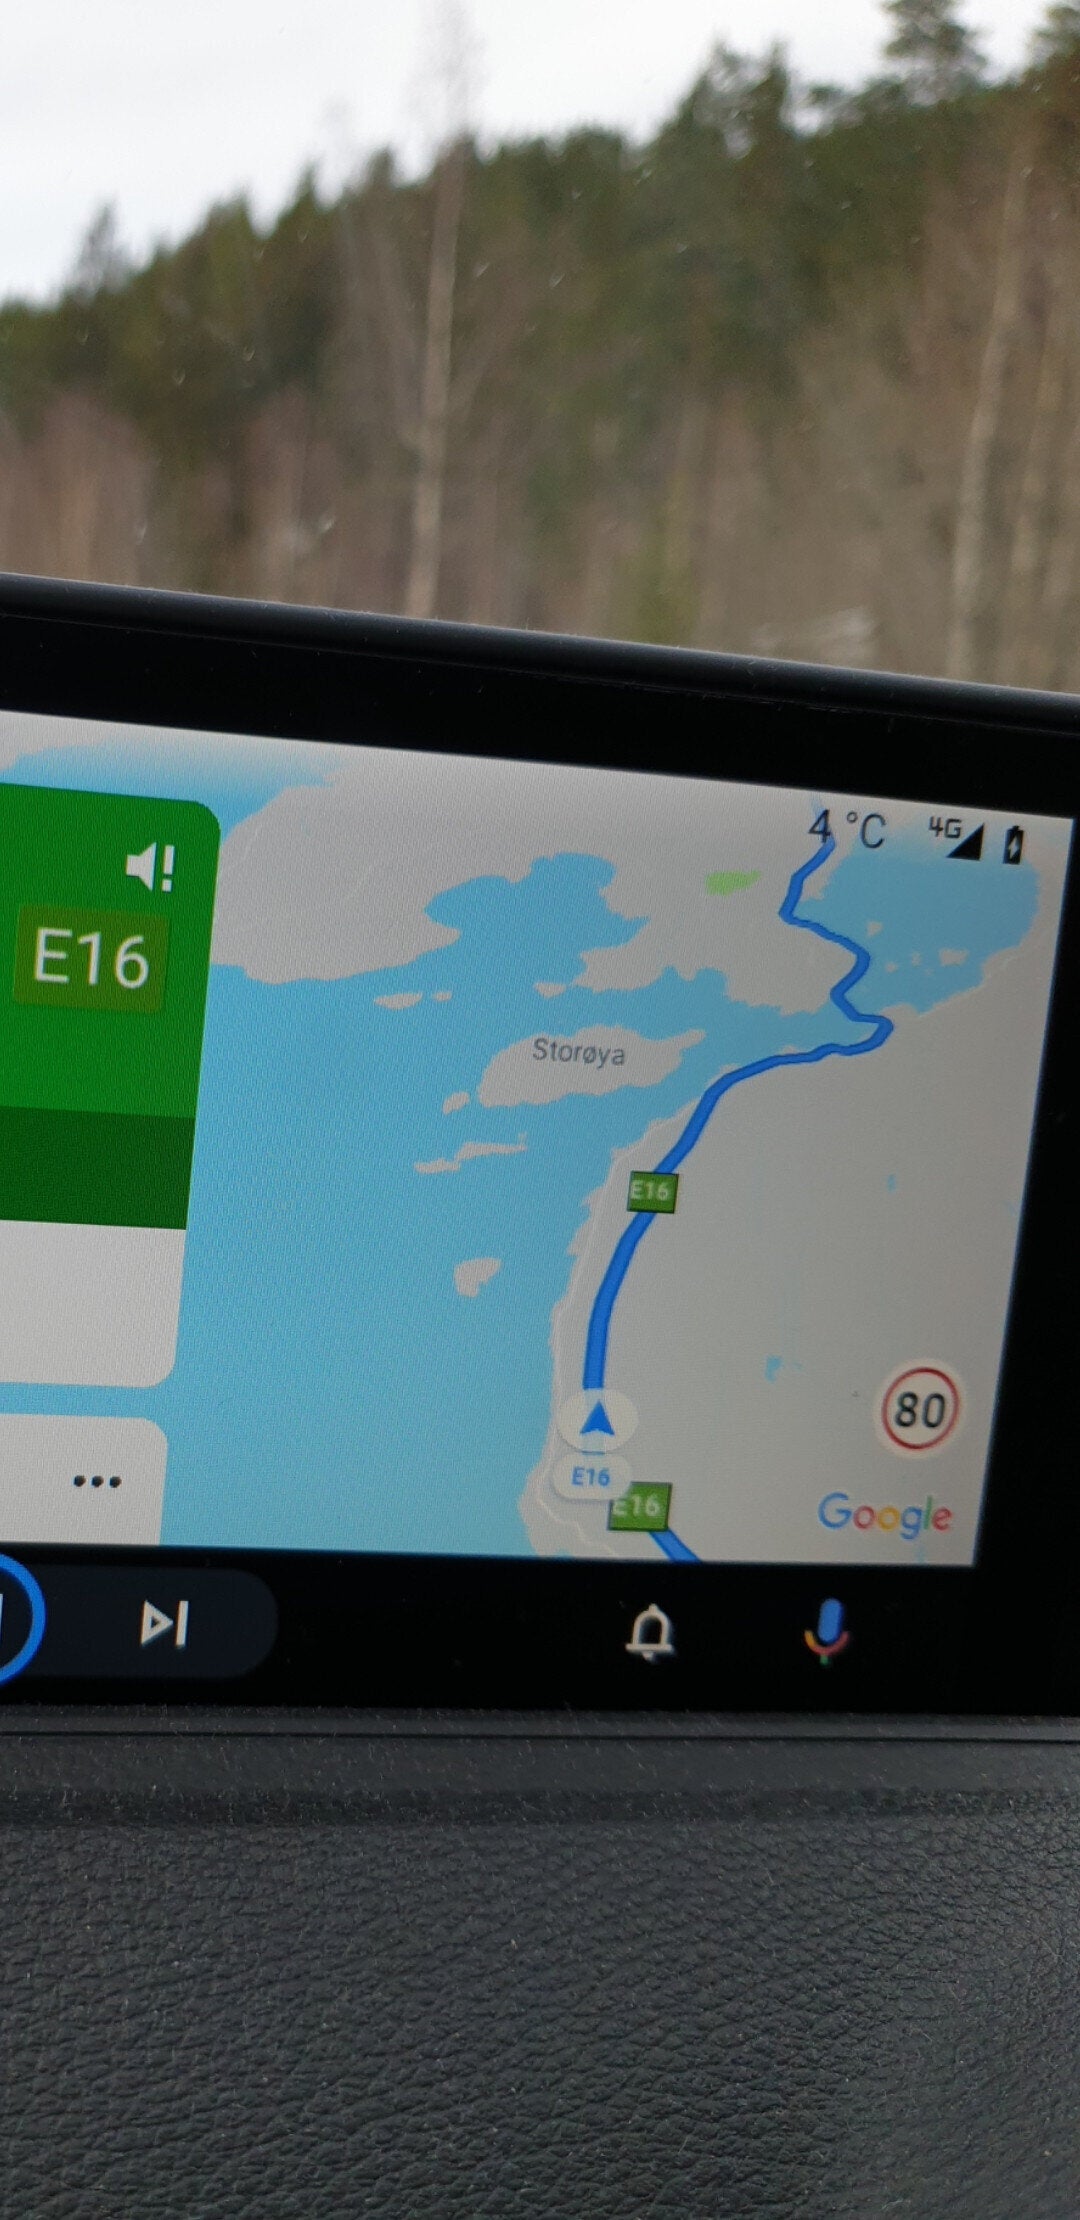 Speed limits pop up in Android Auto when using Google Maps